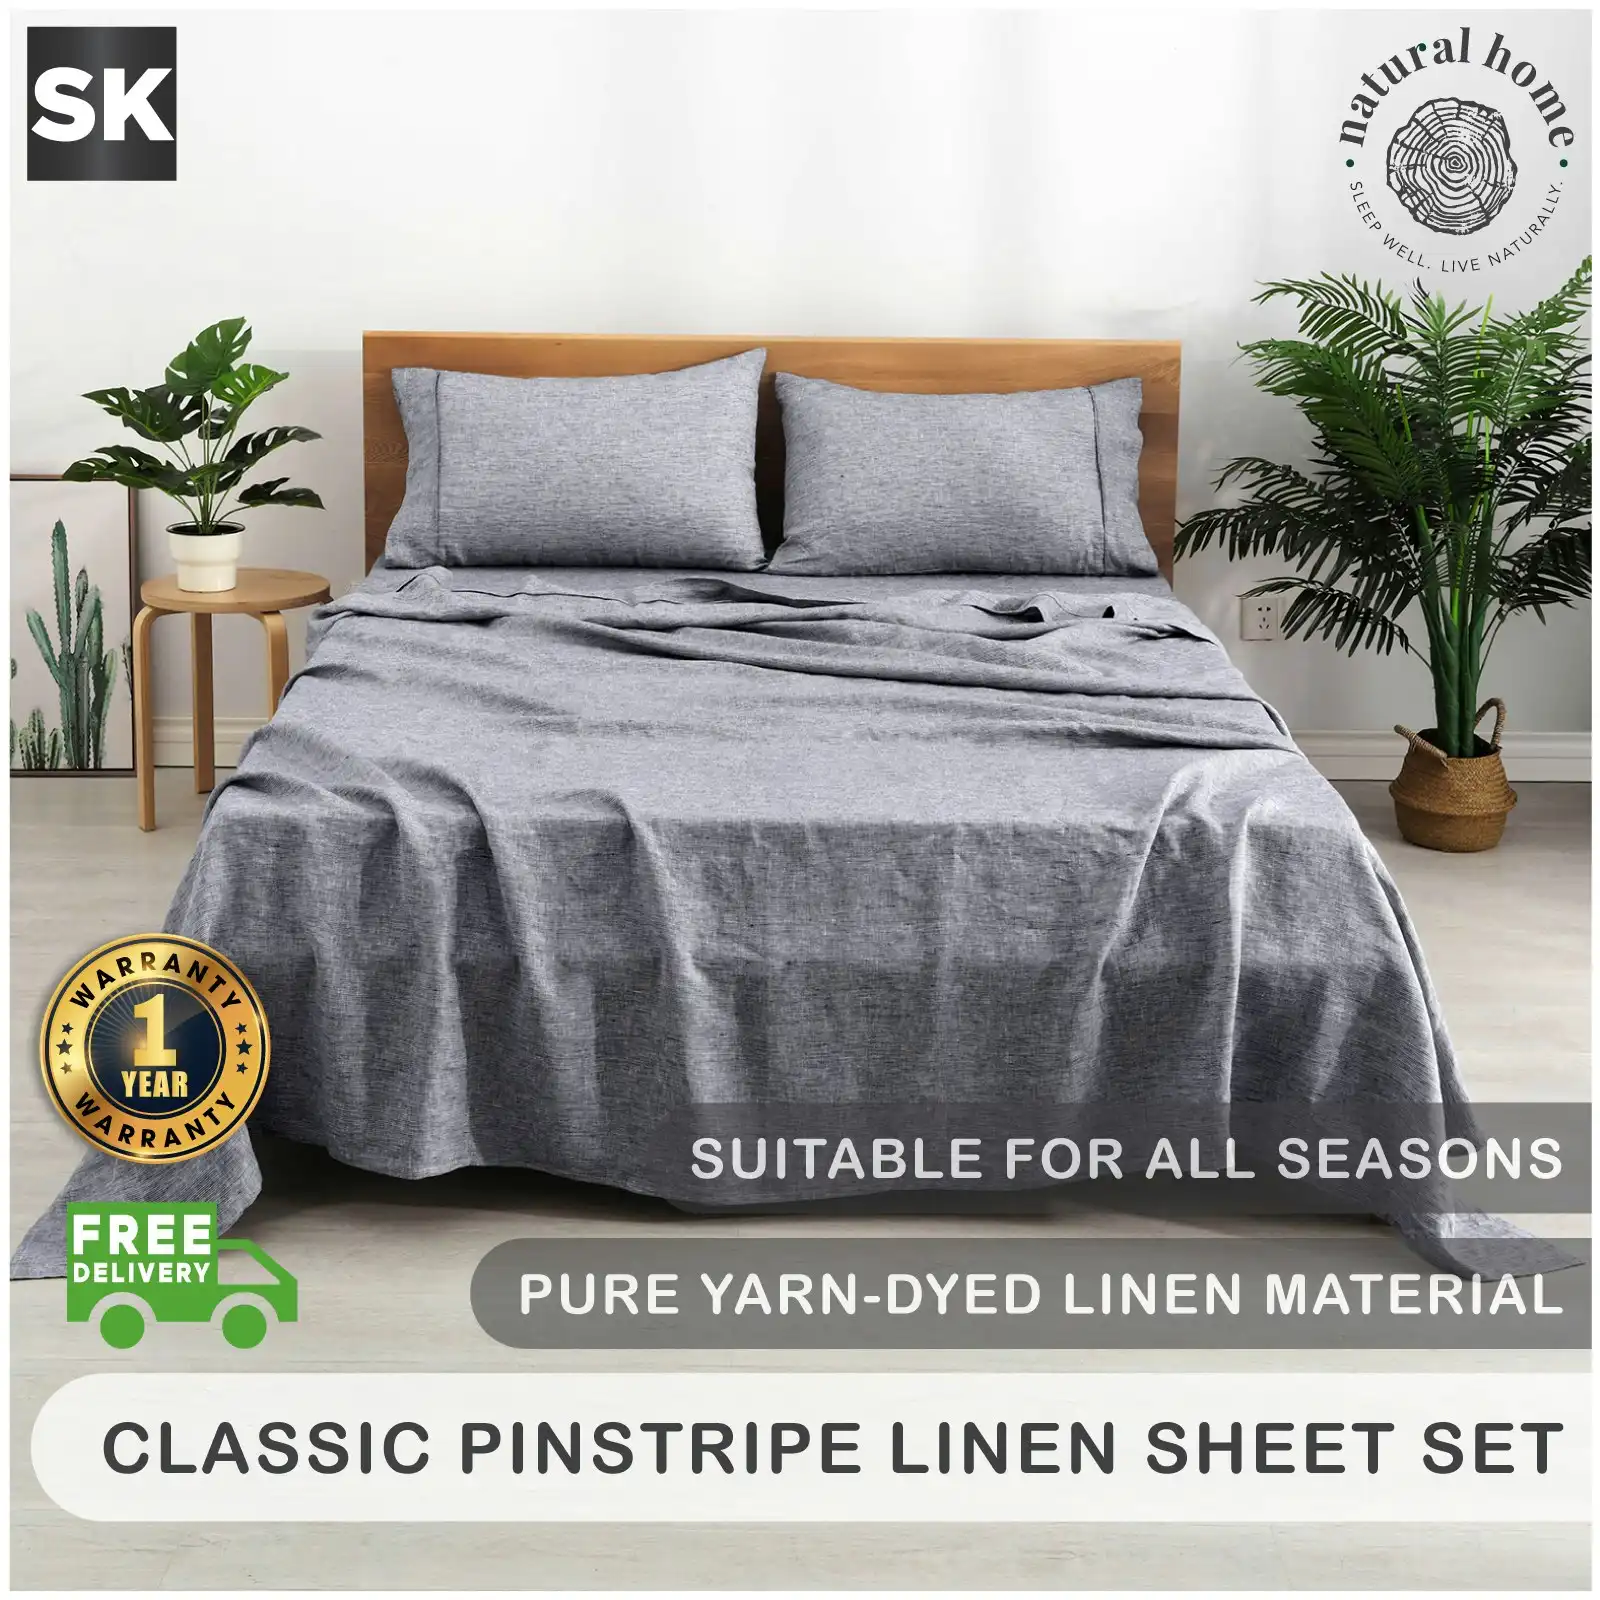 Natural Home Classic Pinstripe Linen Sheet Set Dark with White Pinstripe Super King Bed